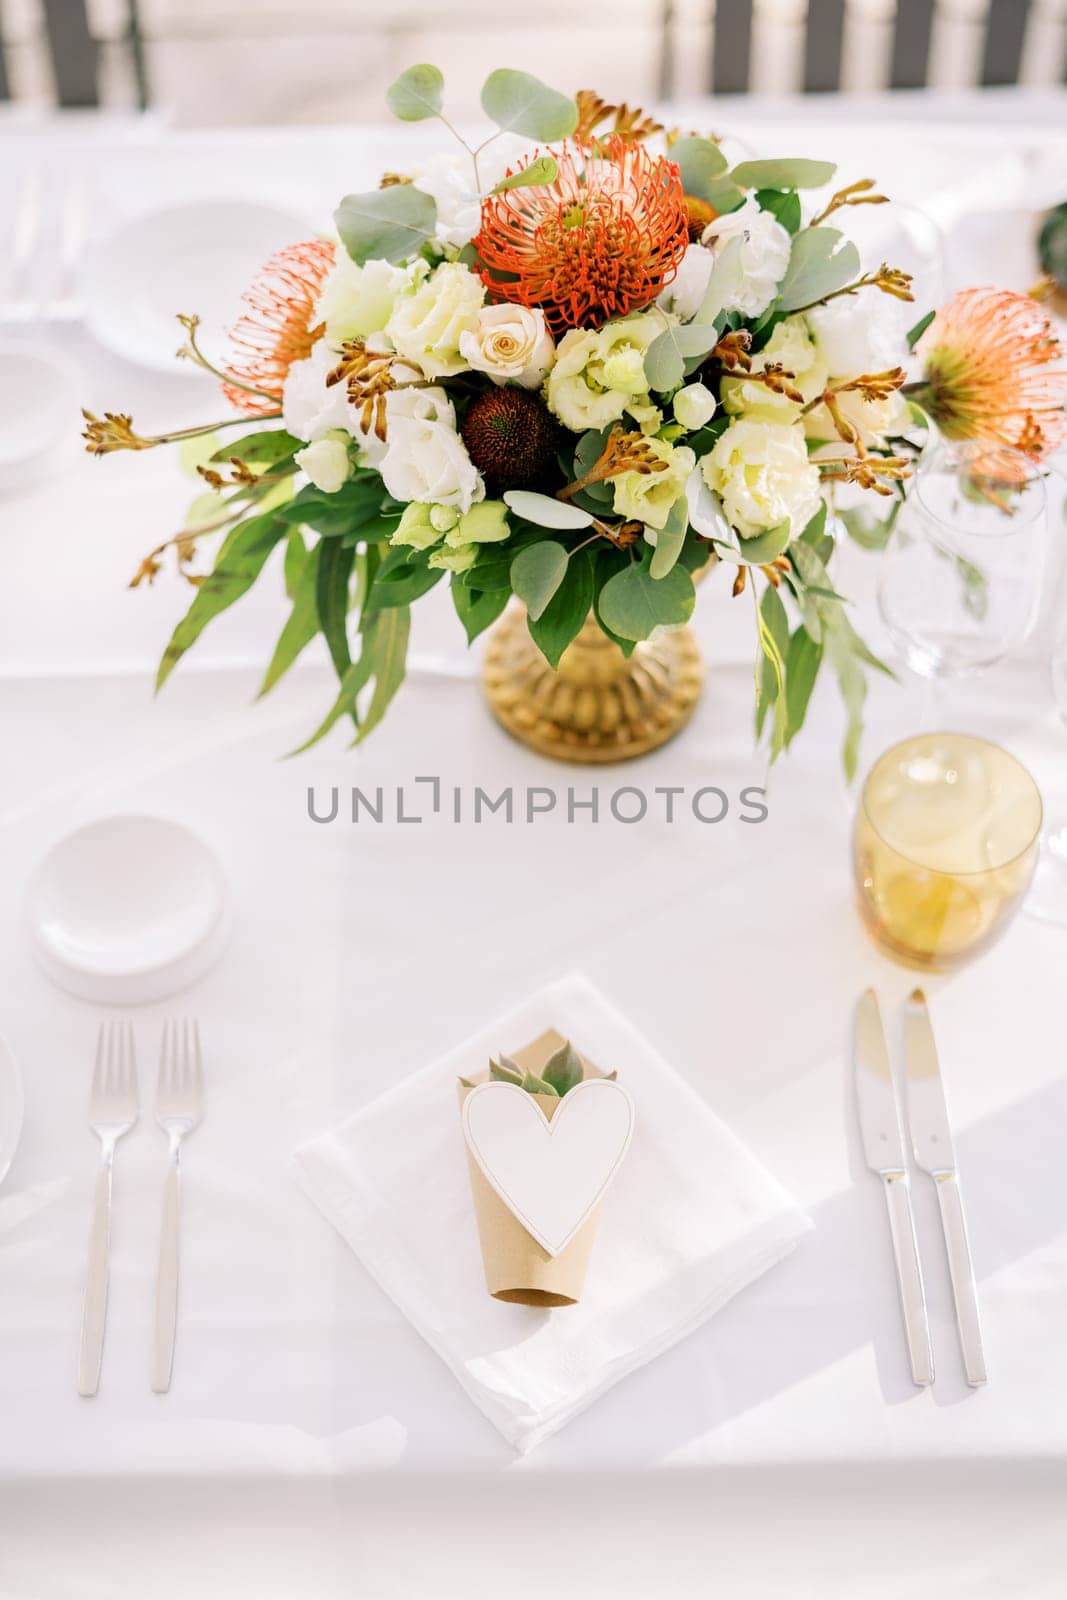 Bouquet of flowers stands on a festive table near an invitation with a paper heart on a napkin by Nadtochiy